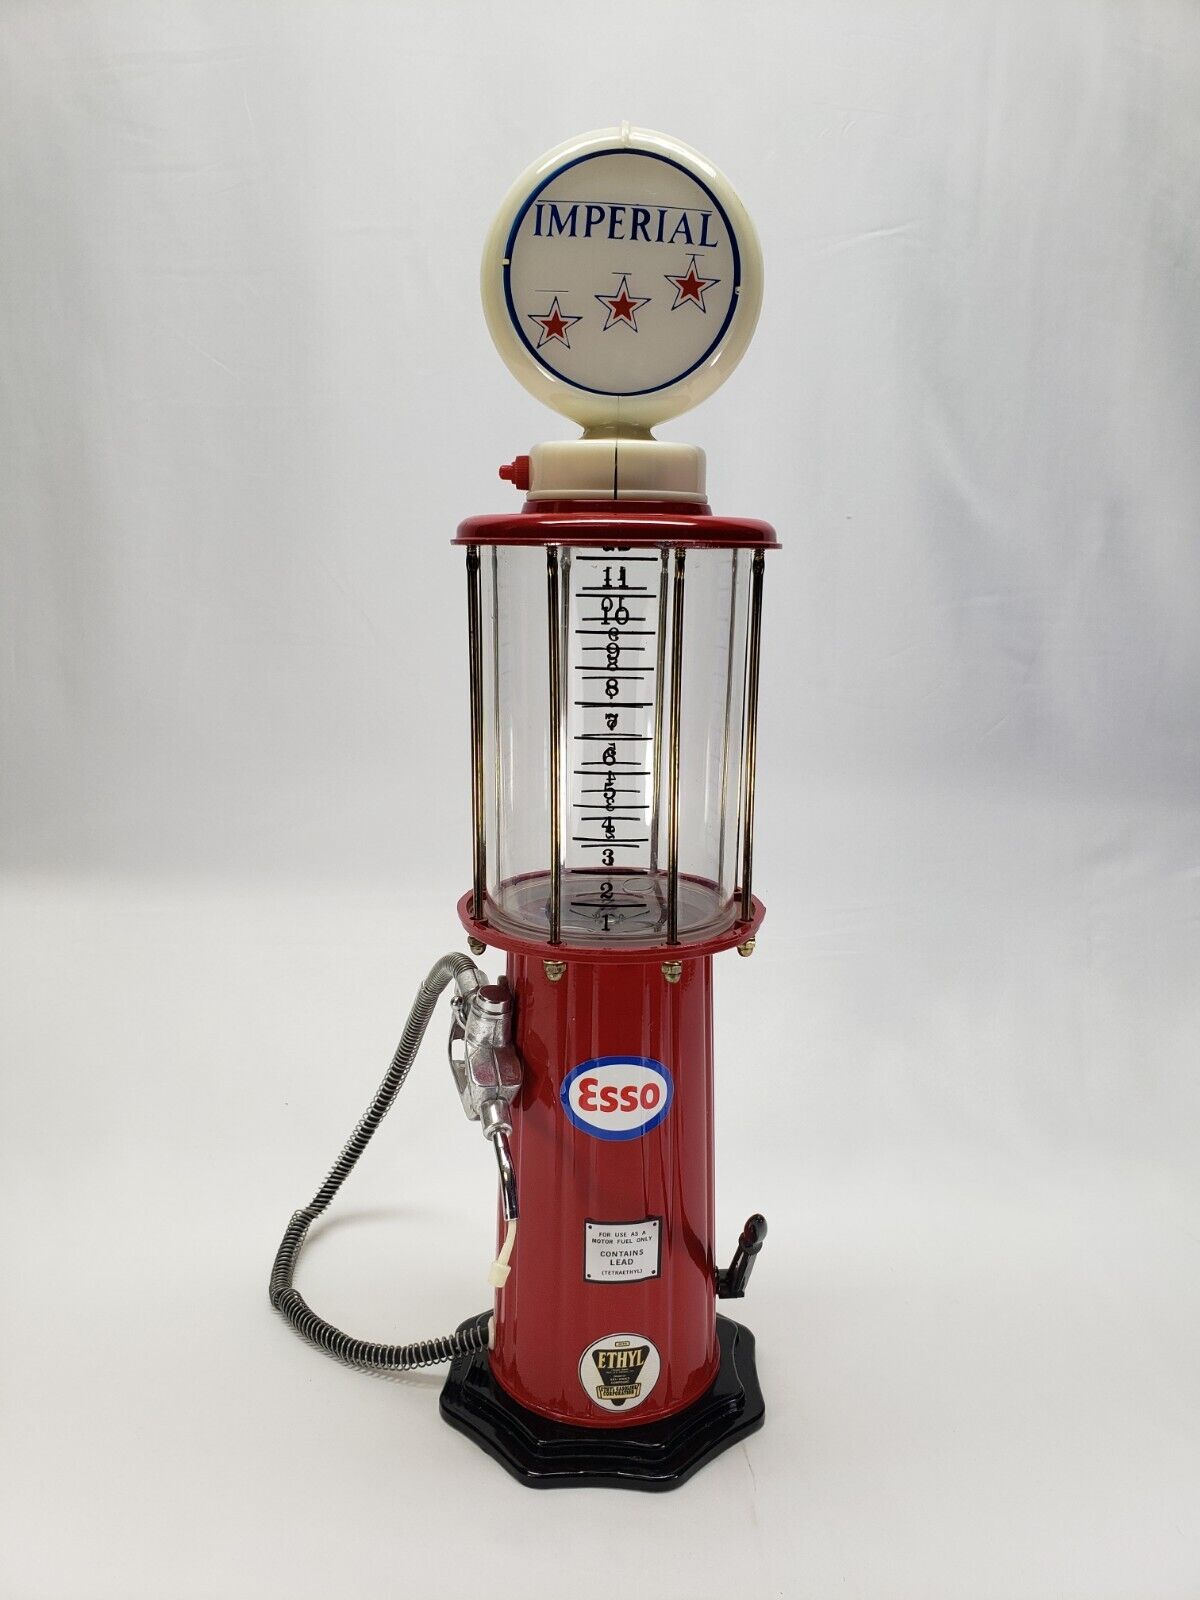 Vintage Esso Imperial Gas Pump Drink Dispenser Olde Tyme Reproduction Circa 1920